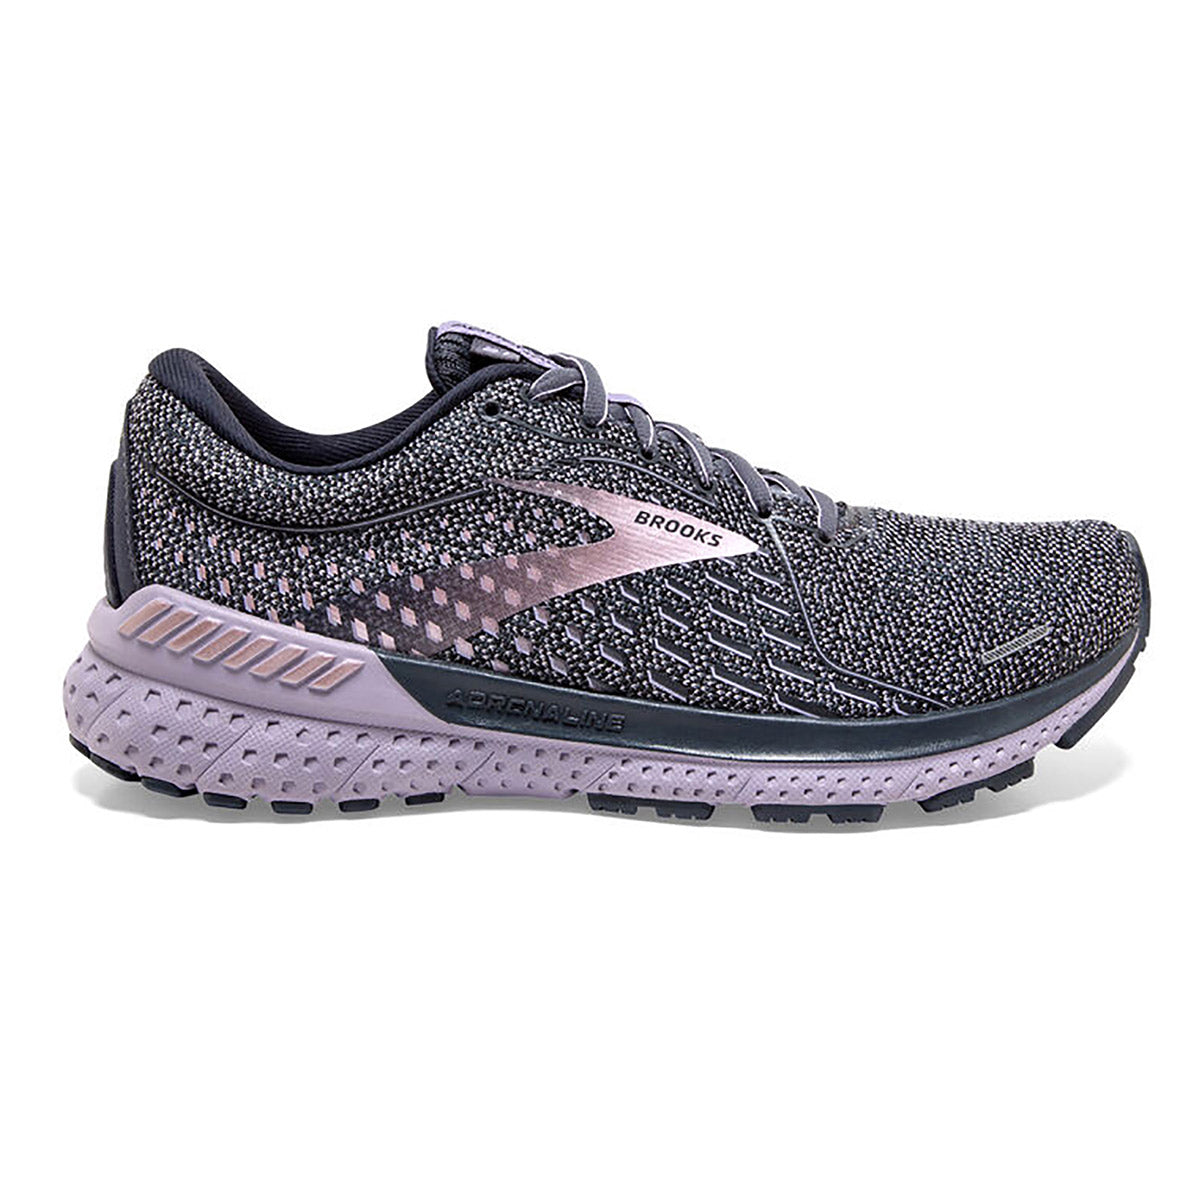 A black and pink Brooks ADRENALINE GTS 21 OMBRE/LAVENDAR running shoe with BioMoGo DNA midsole cushioning technology.